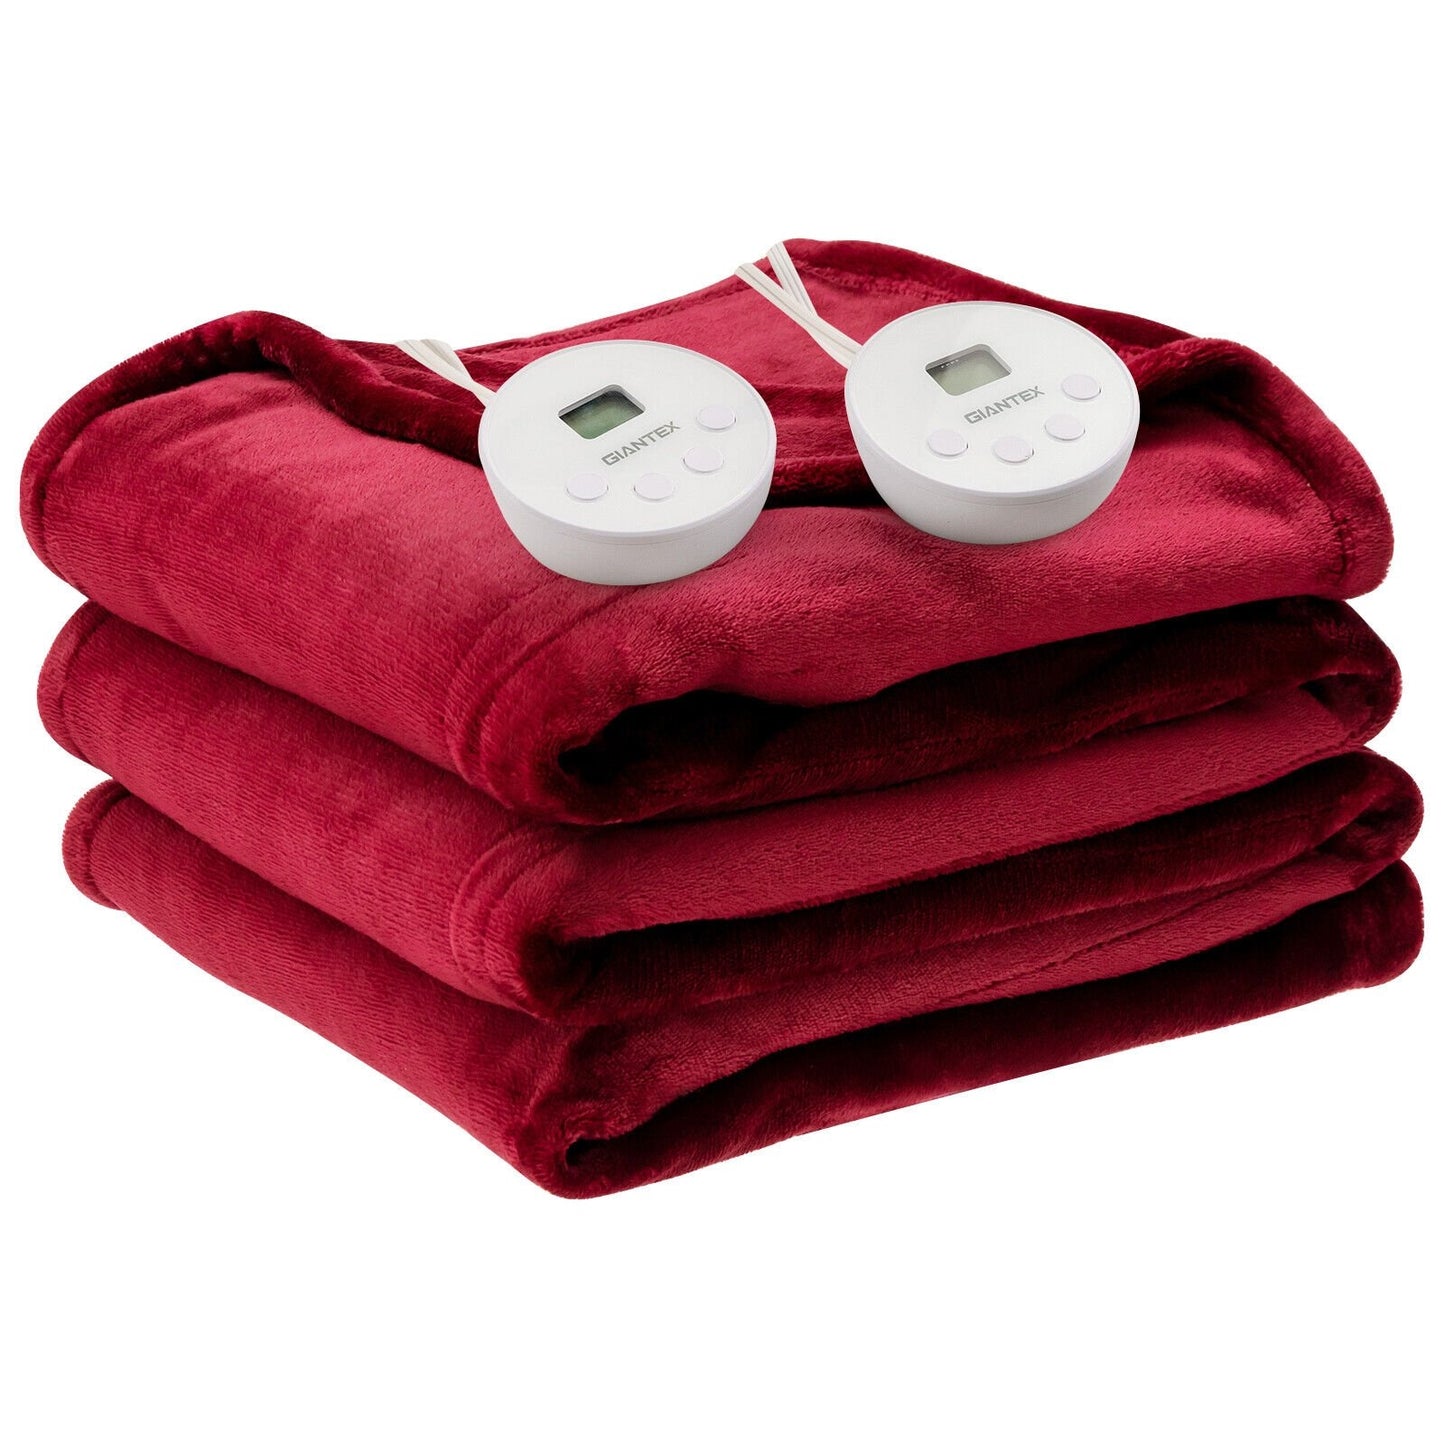 84 x 90 Inch Queen Size Electric Heated Dual Control Throw Blanket with Timer, Red